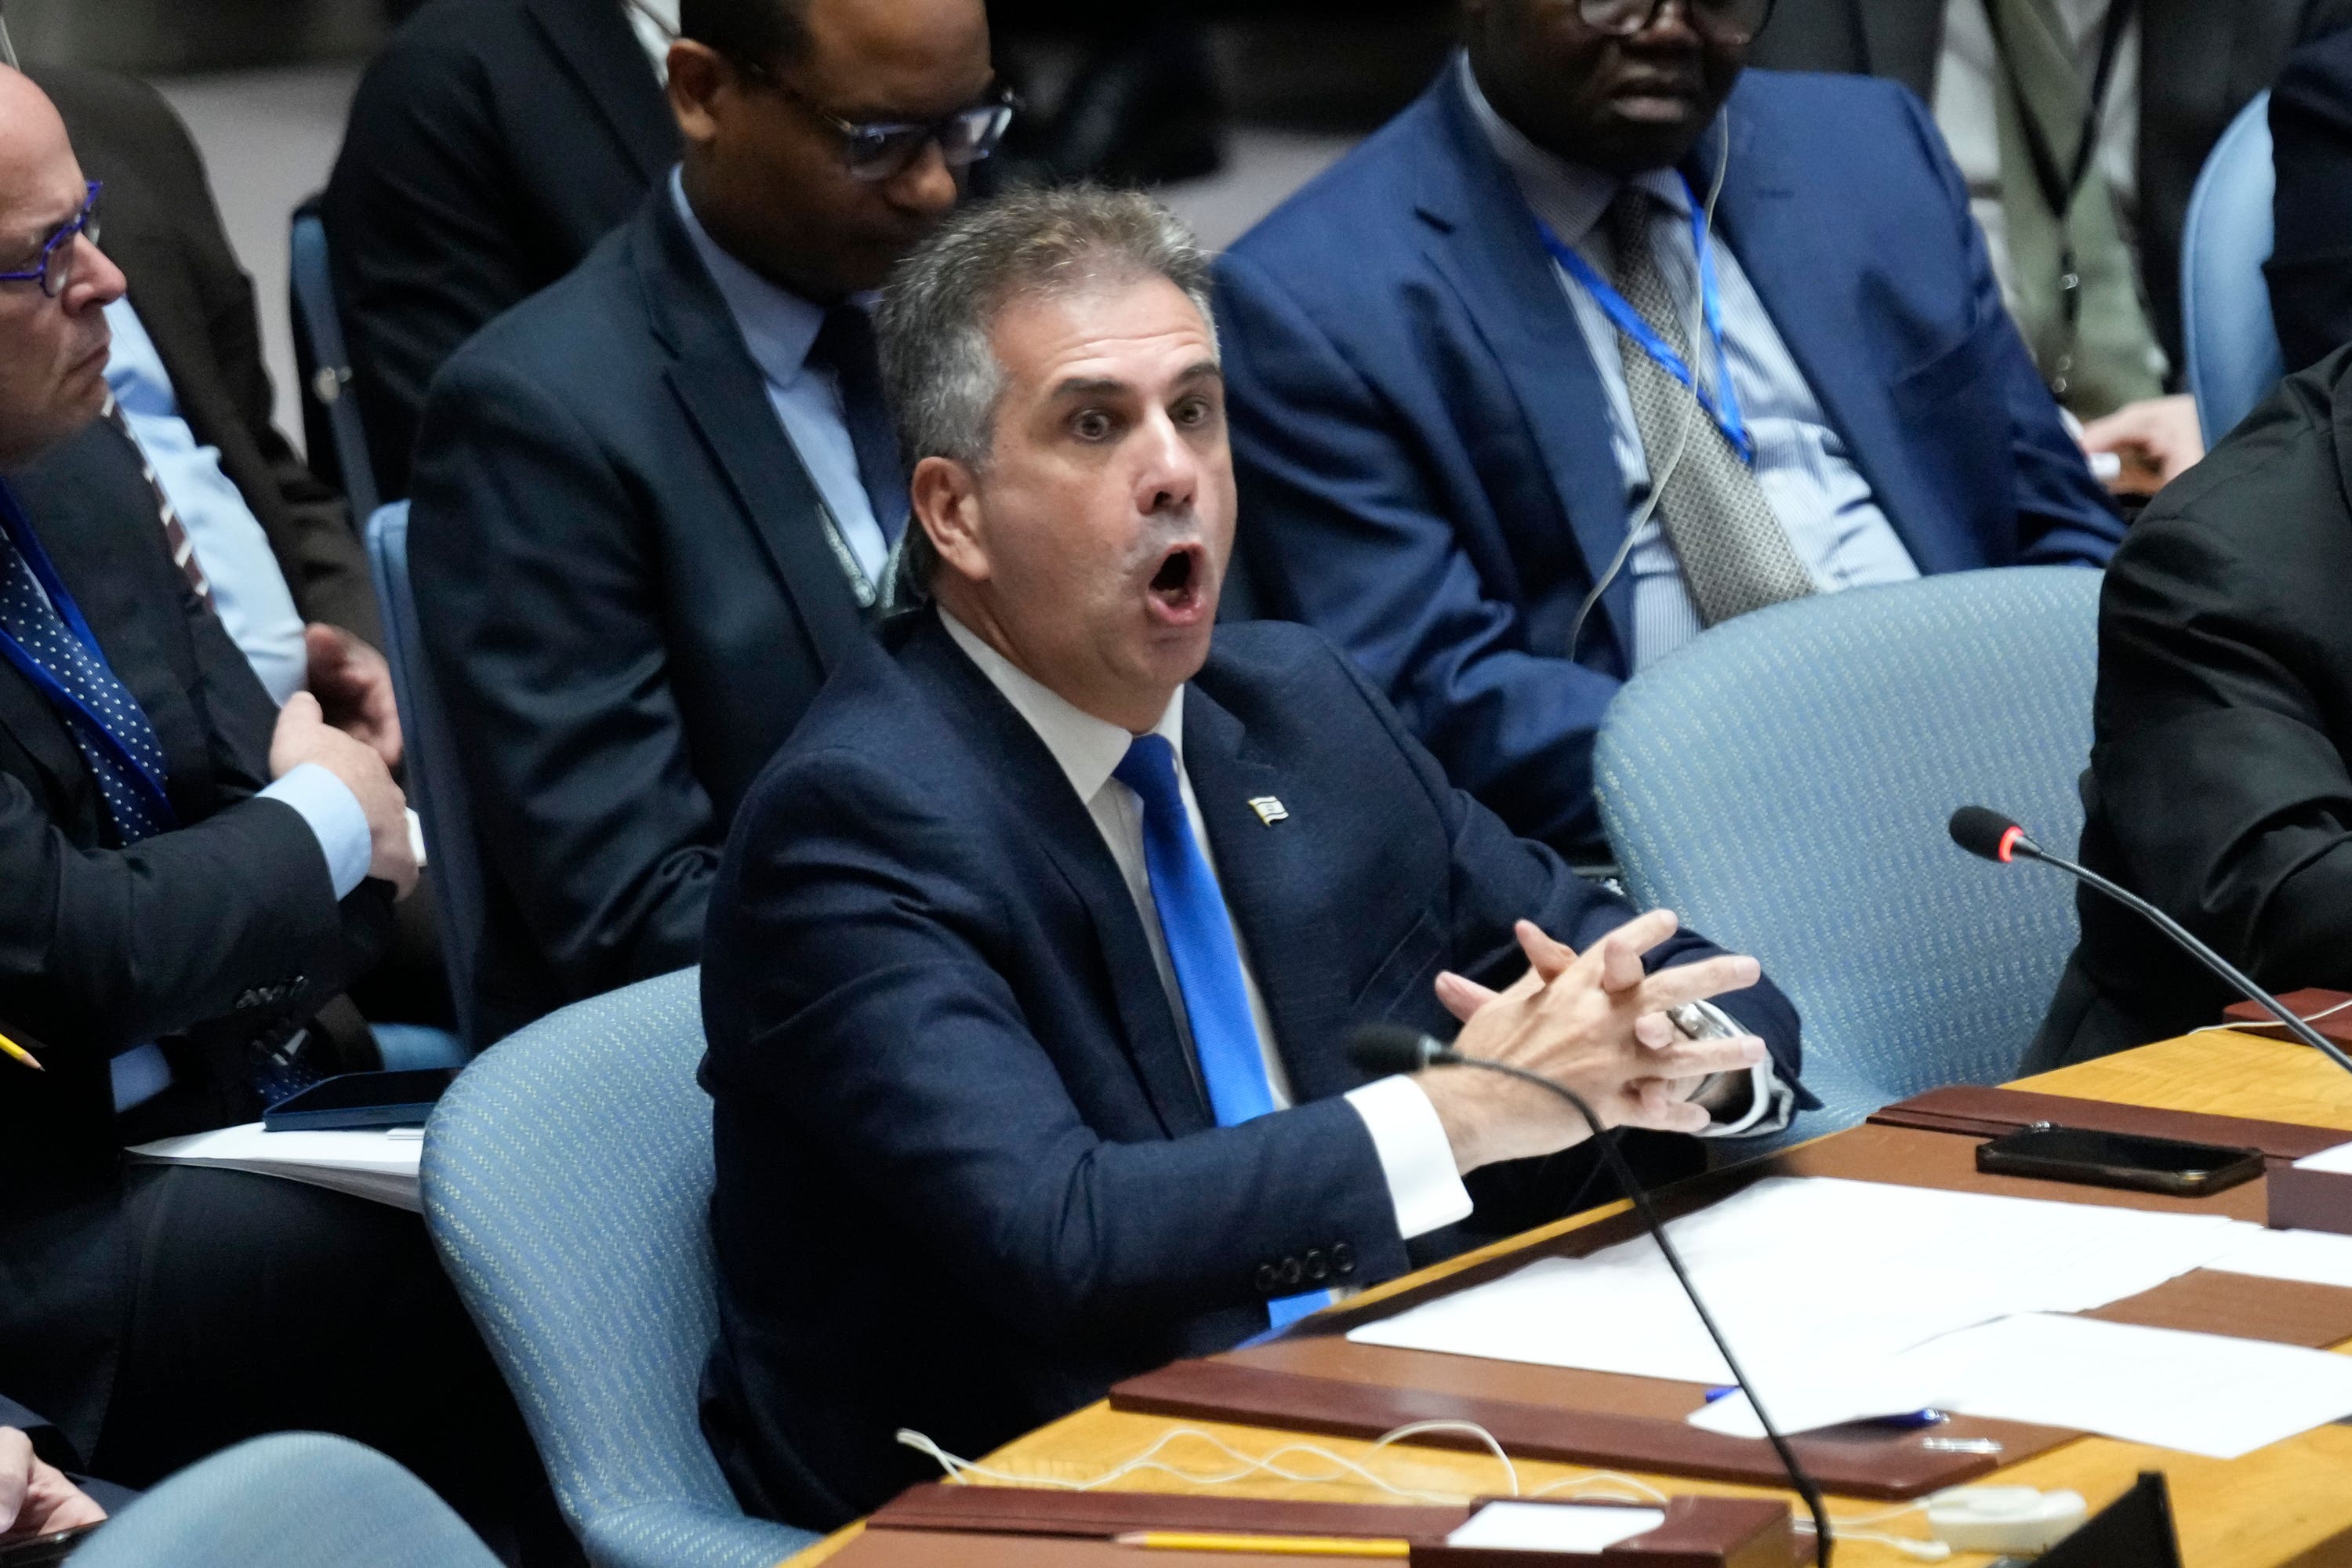 Eli Cohen speaks during the Security Council meeting.